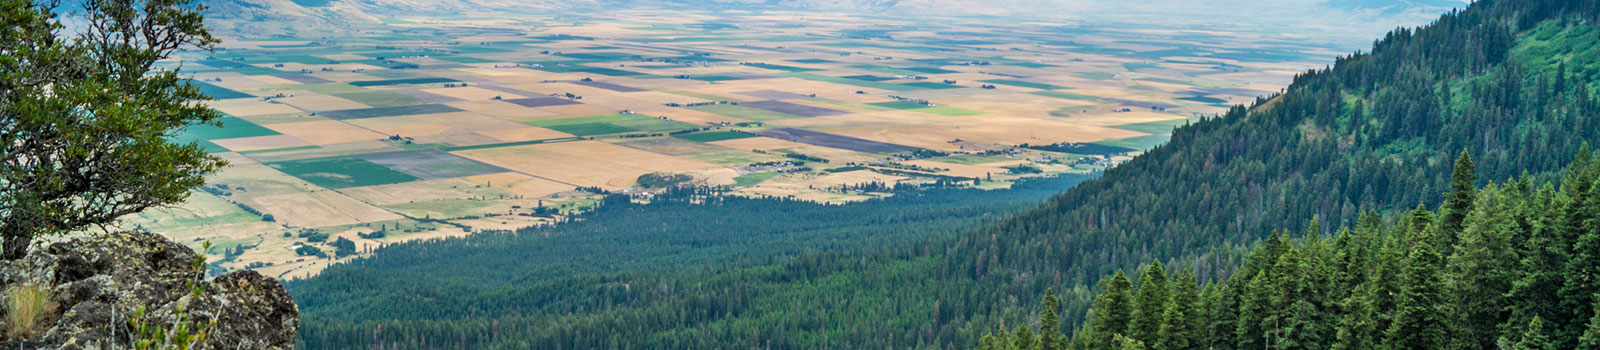 Grande Ronde Valley aerial view from Skyline Road near Elgin, OR.